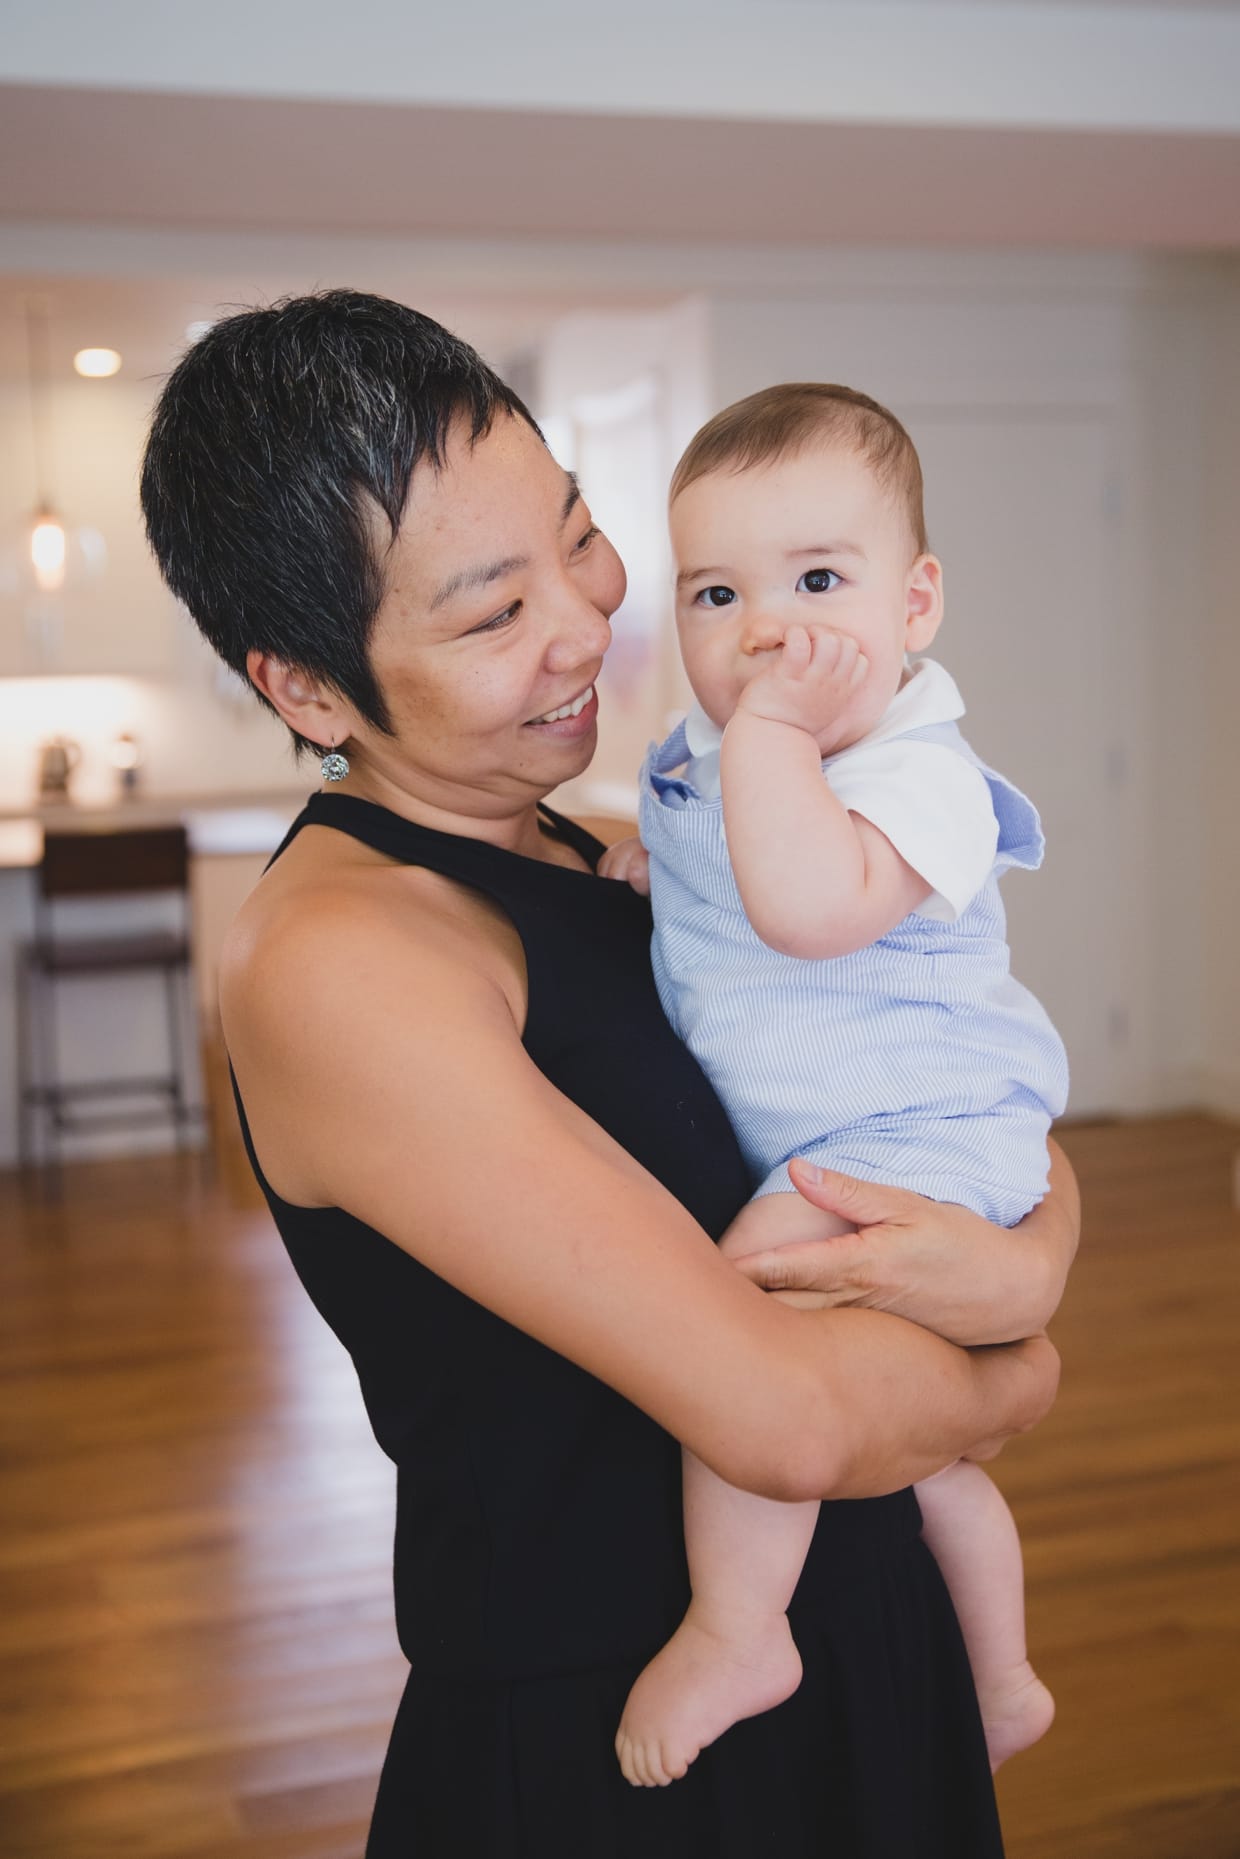 A sweet portrait of a mother holding her baby boy during their in home family photo session in Jamaica Plain